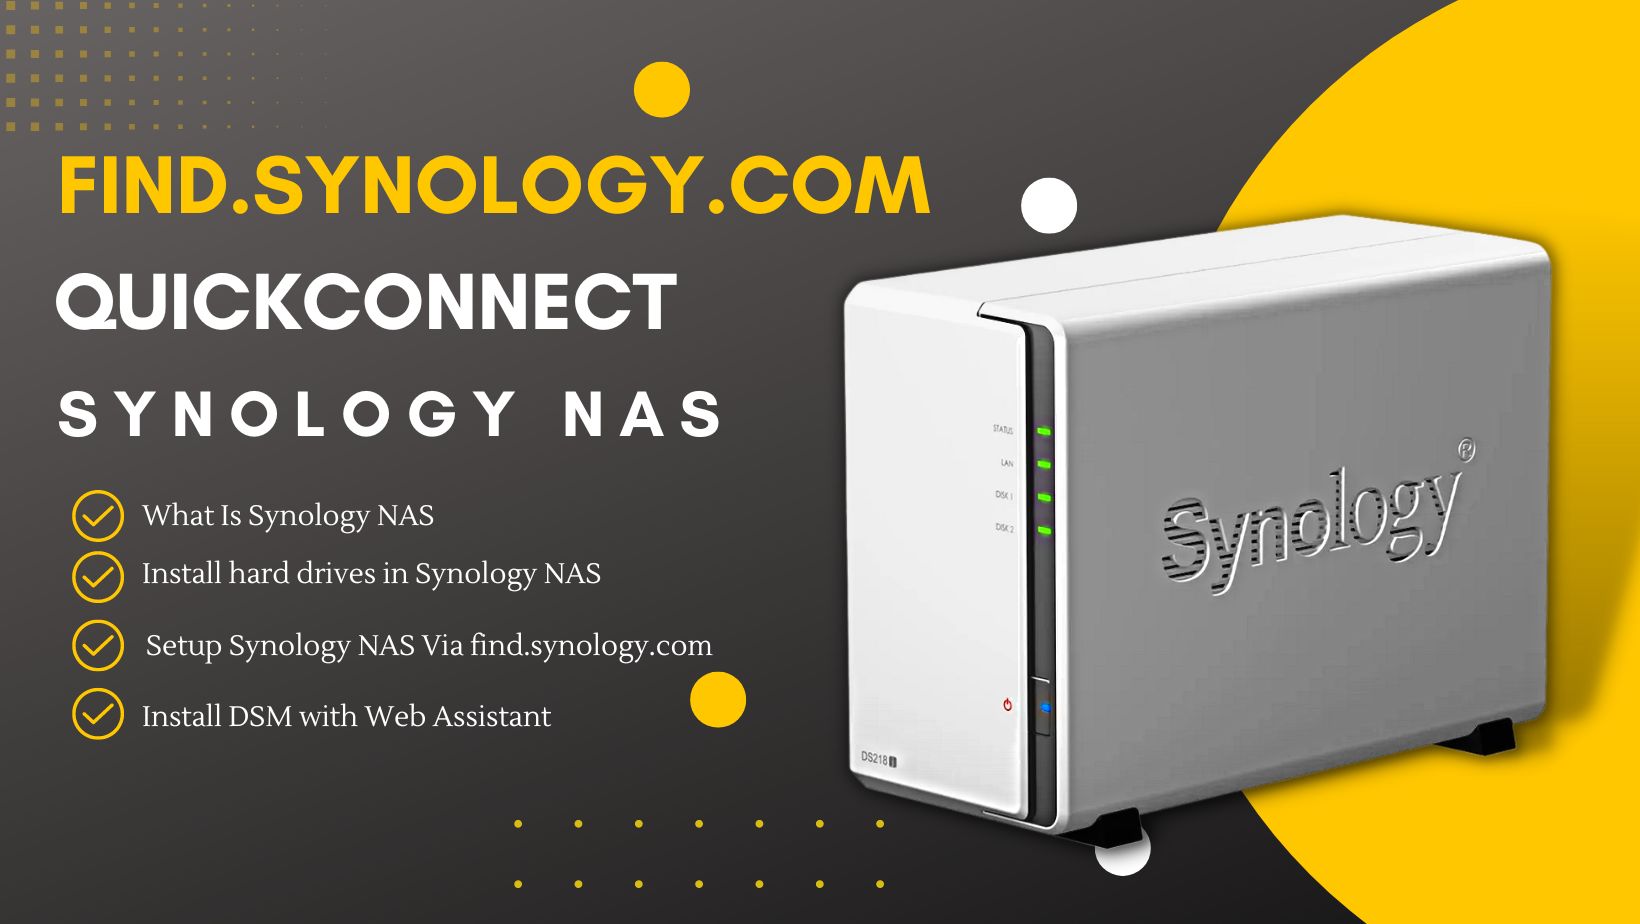 Find.synology.com - QuickConnect - Synology NAS